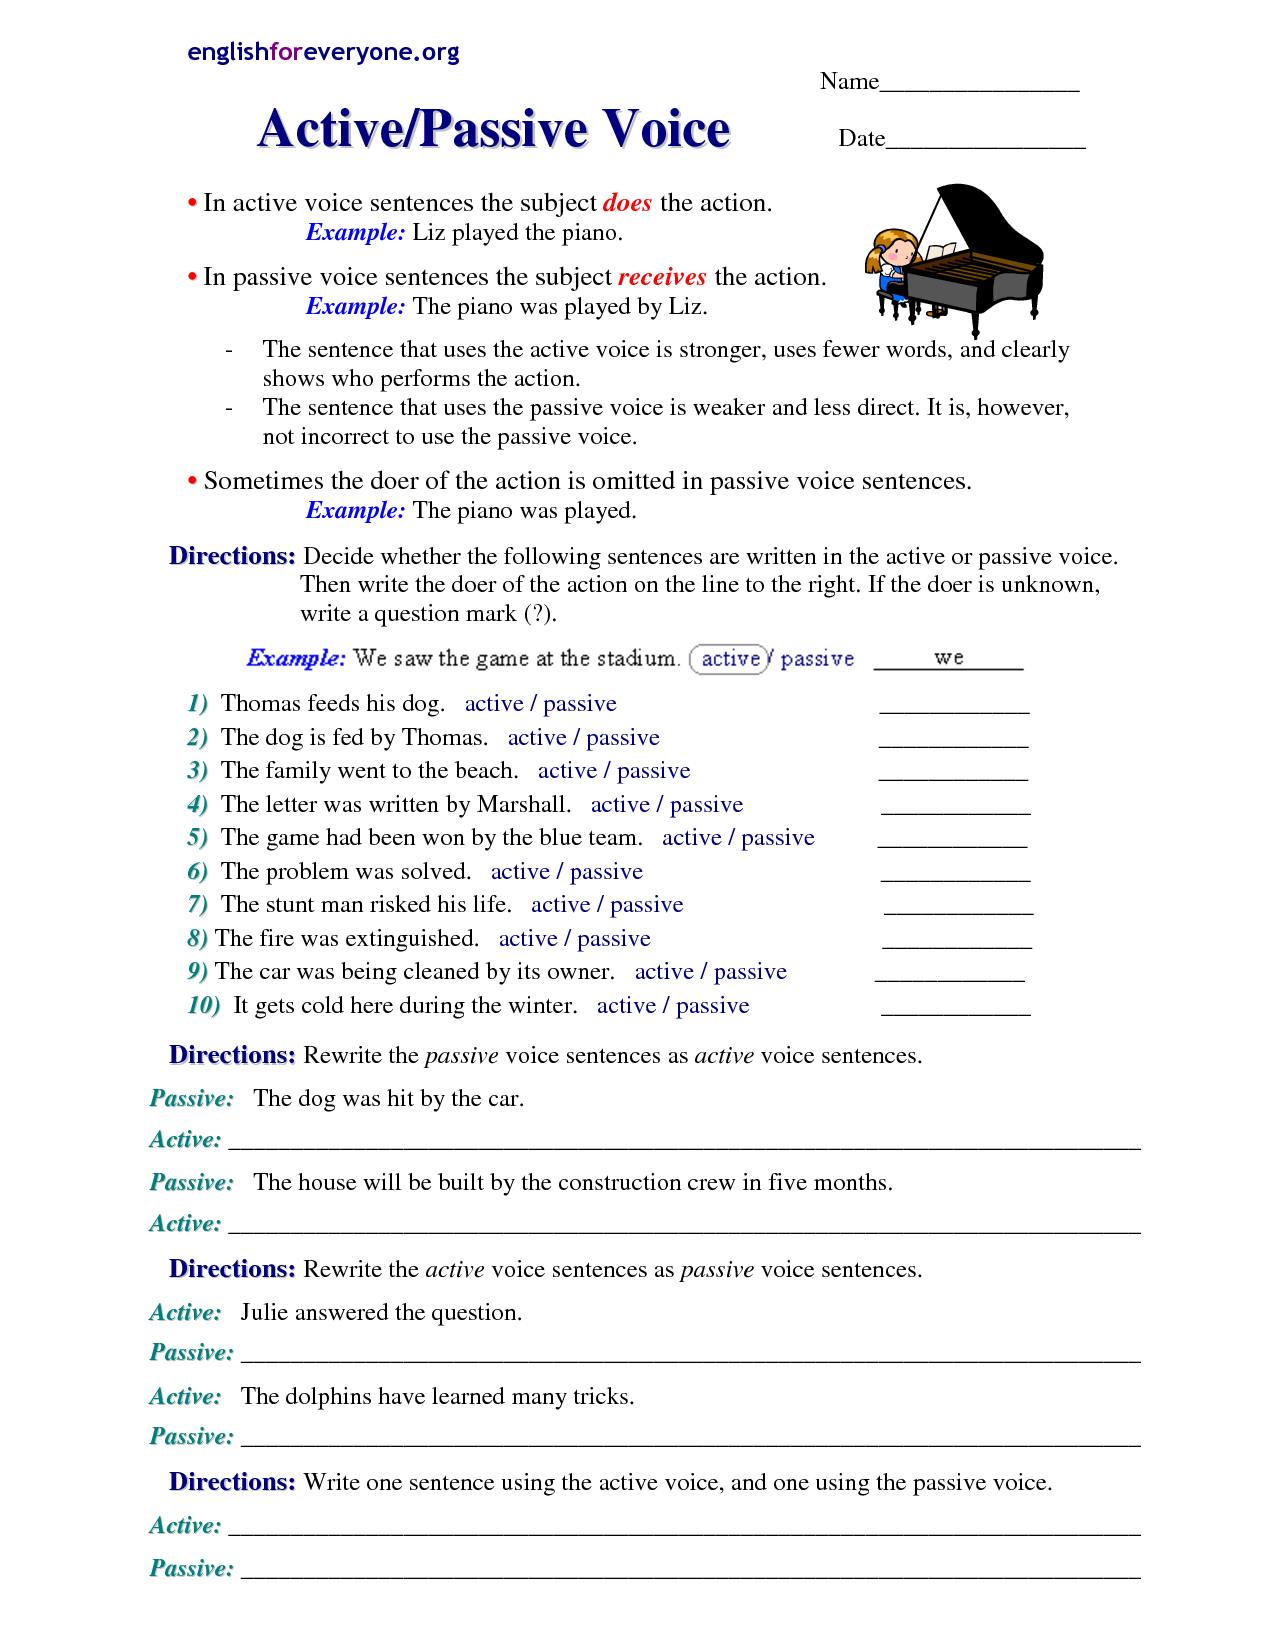 Active And Passive Voice Worksheet With Answers